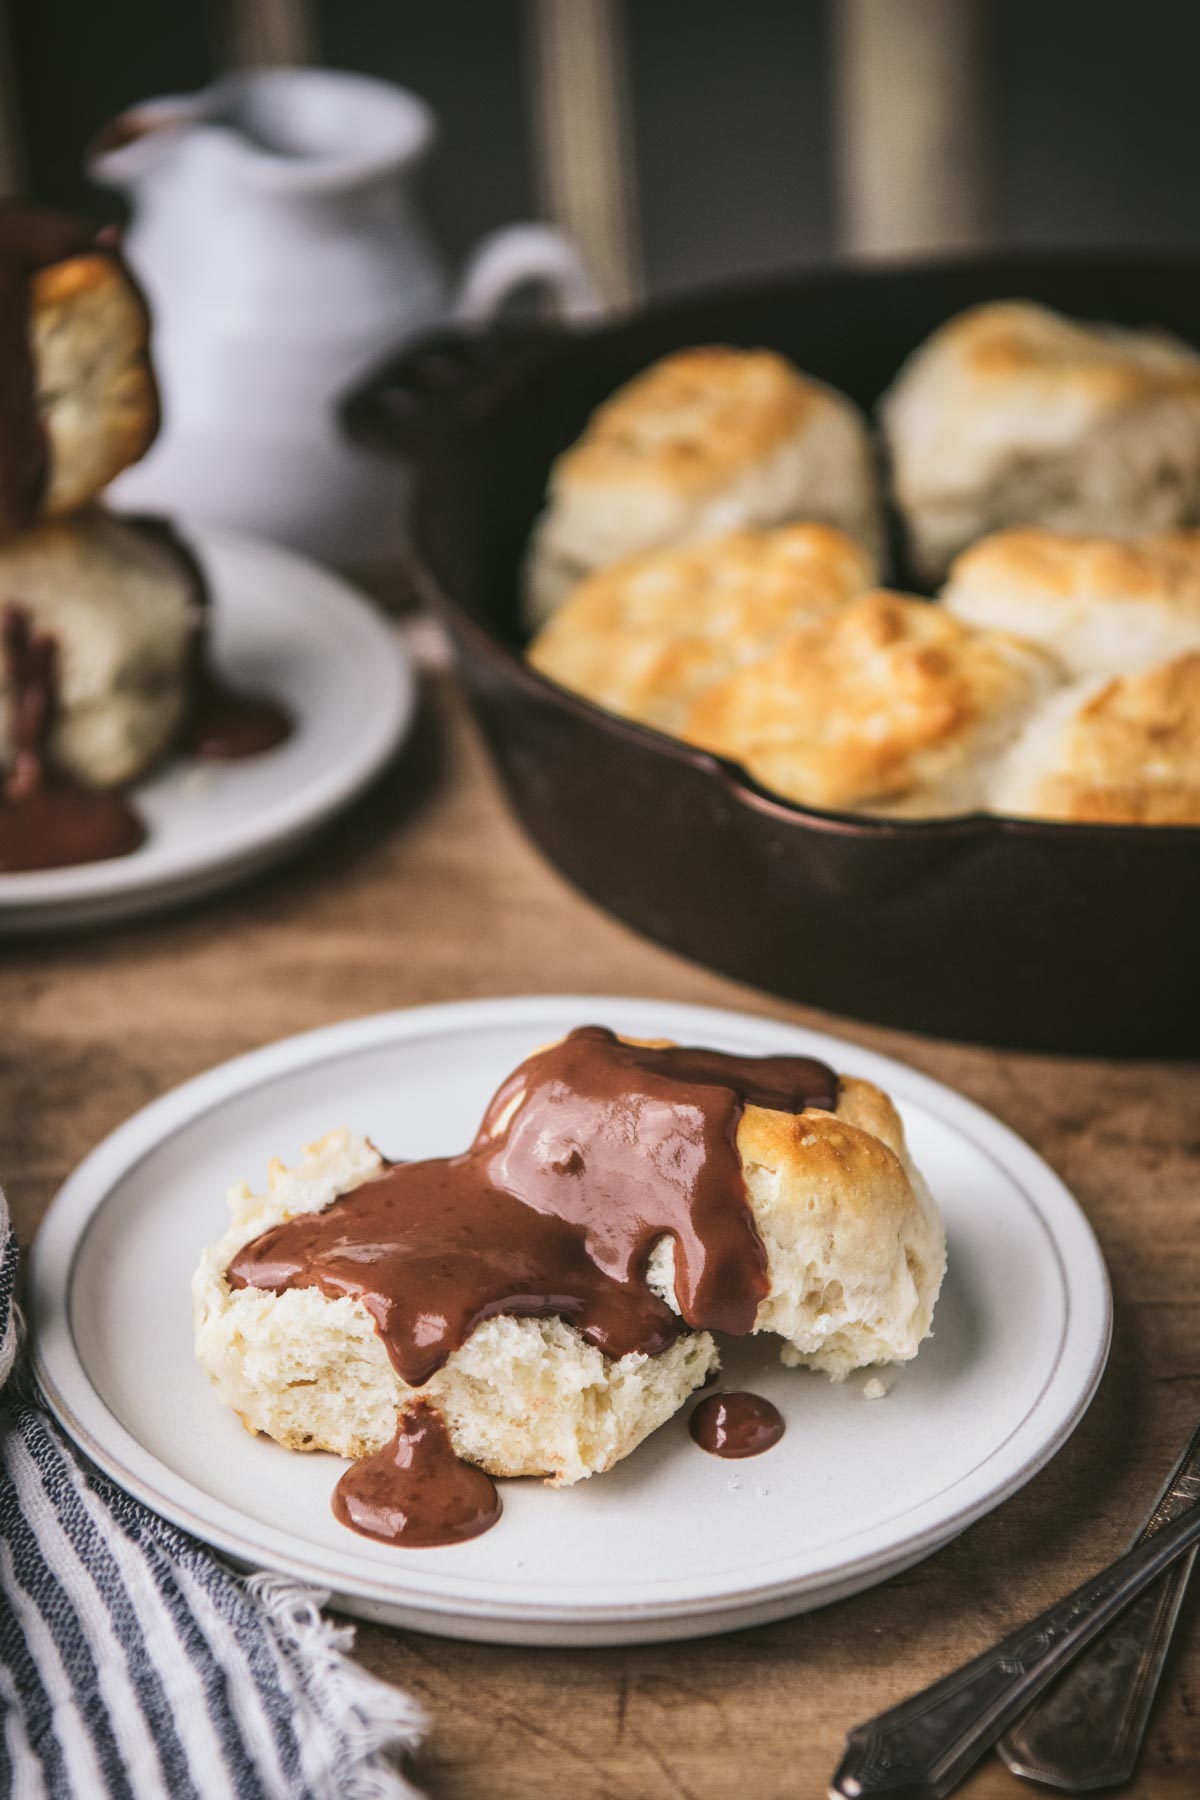 Split biscuit with chocolate gravy on top